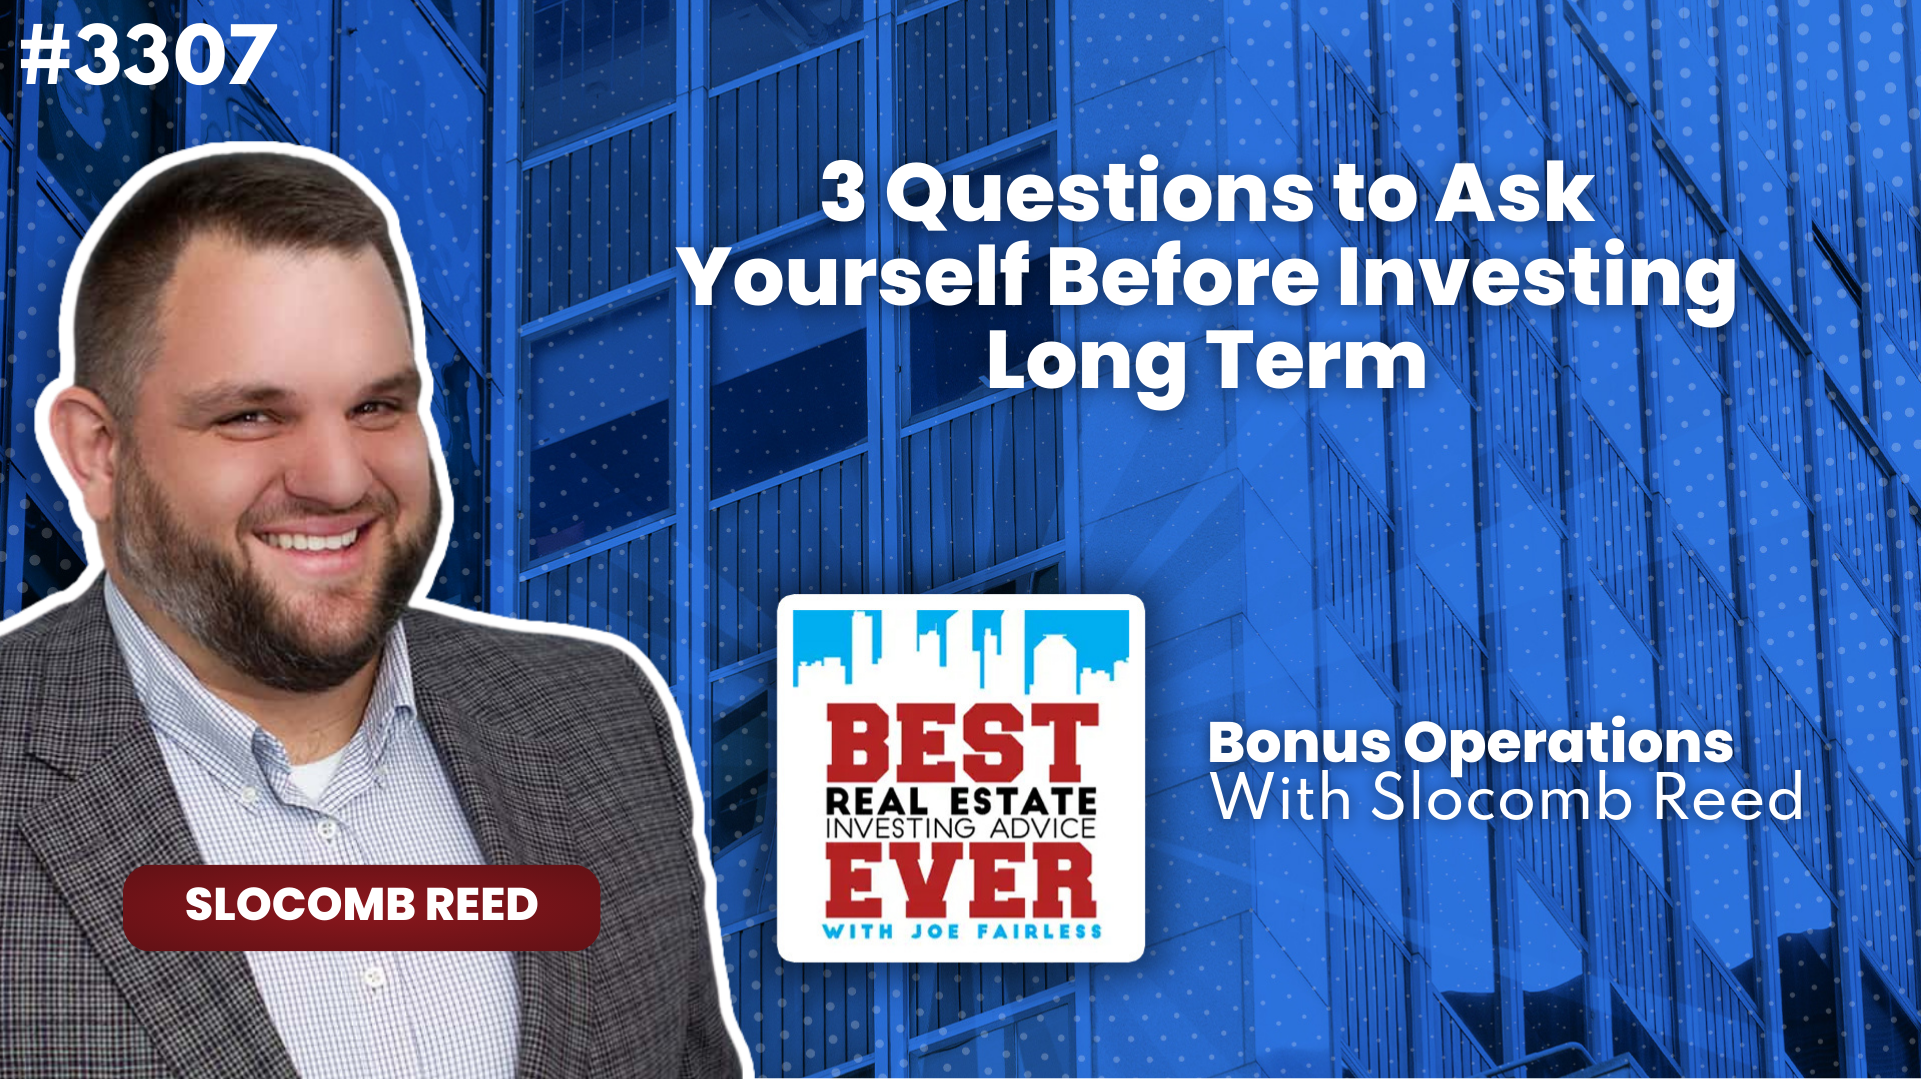 3 Questions to Ask Yourself Before Investing Long Term